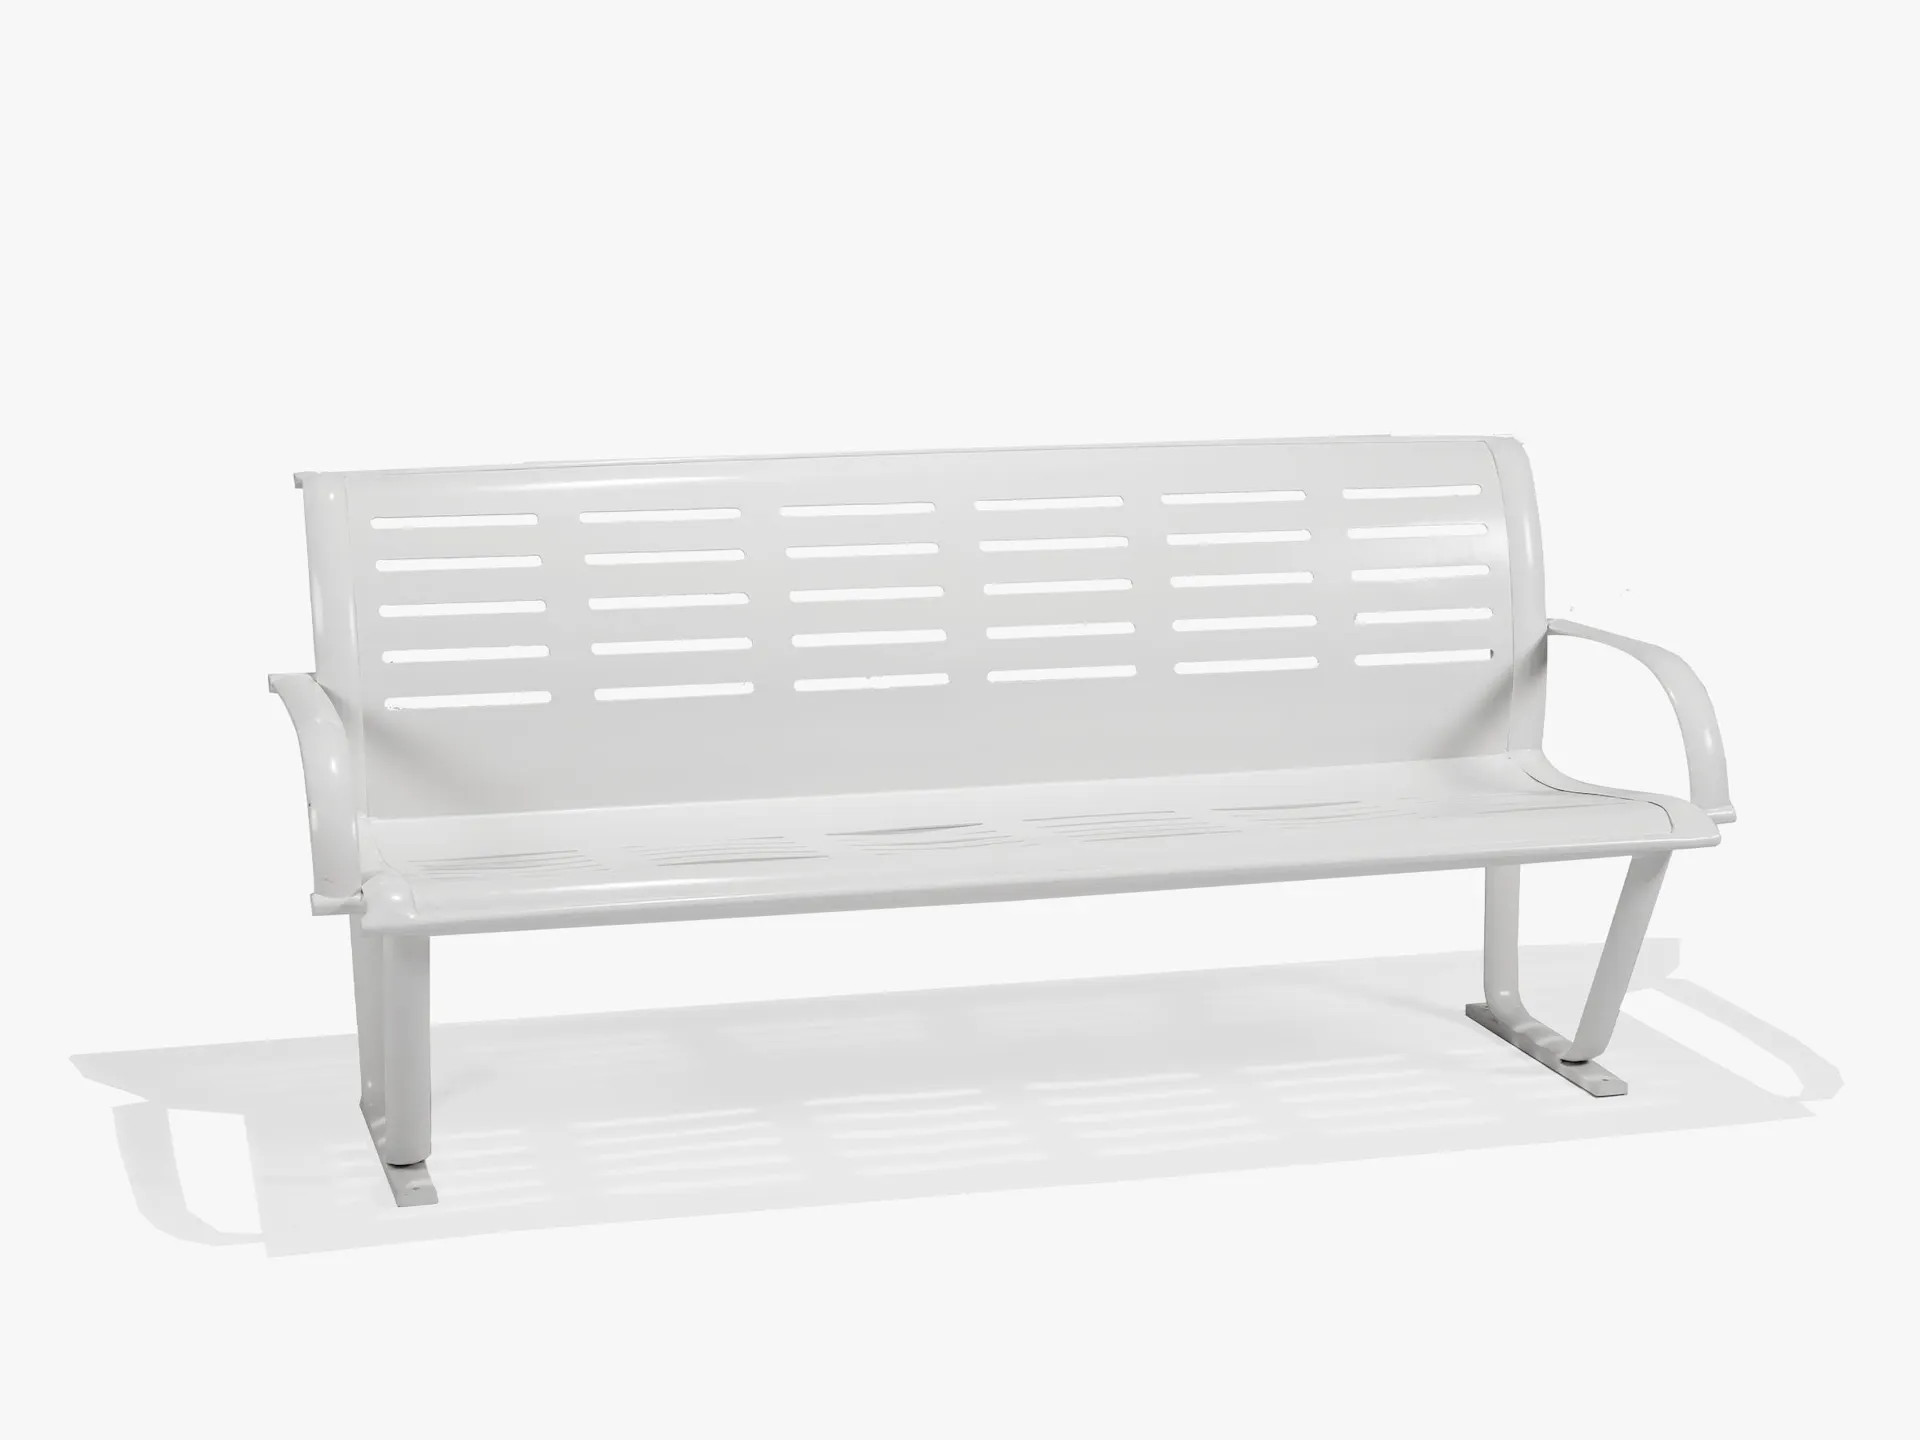 Contemporary Bench with Arms